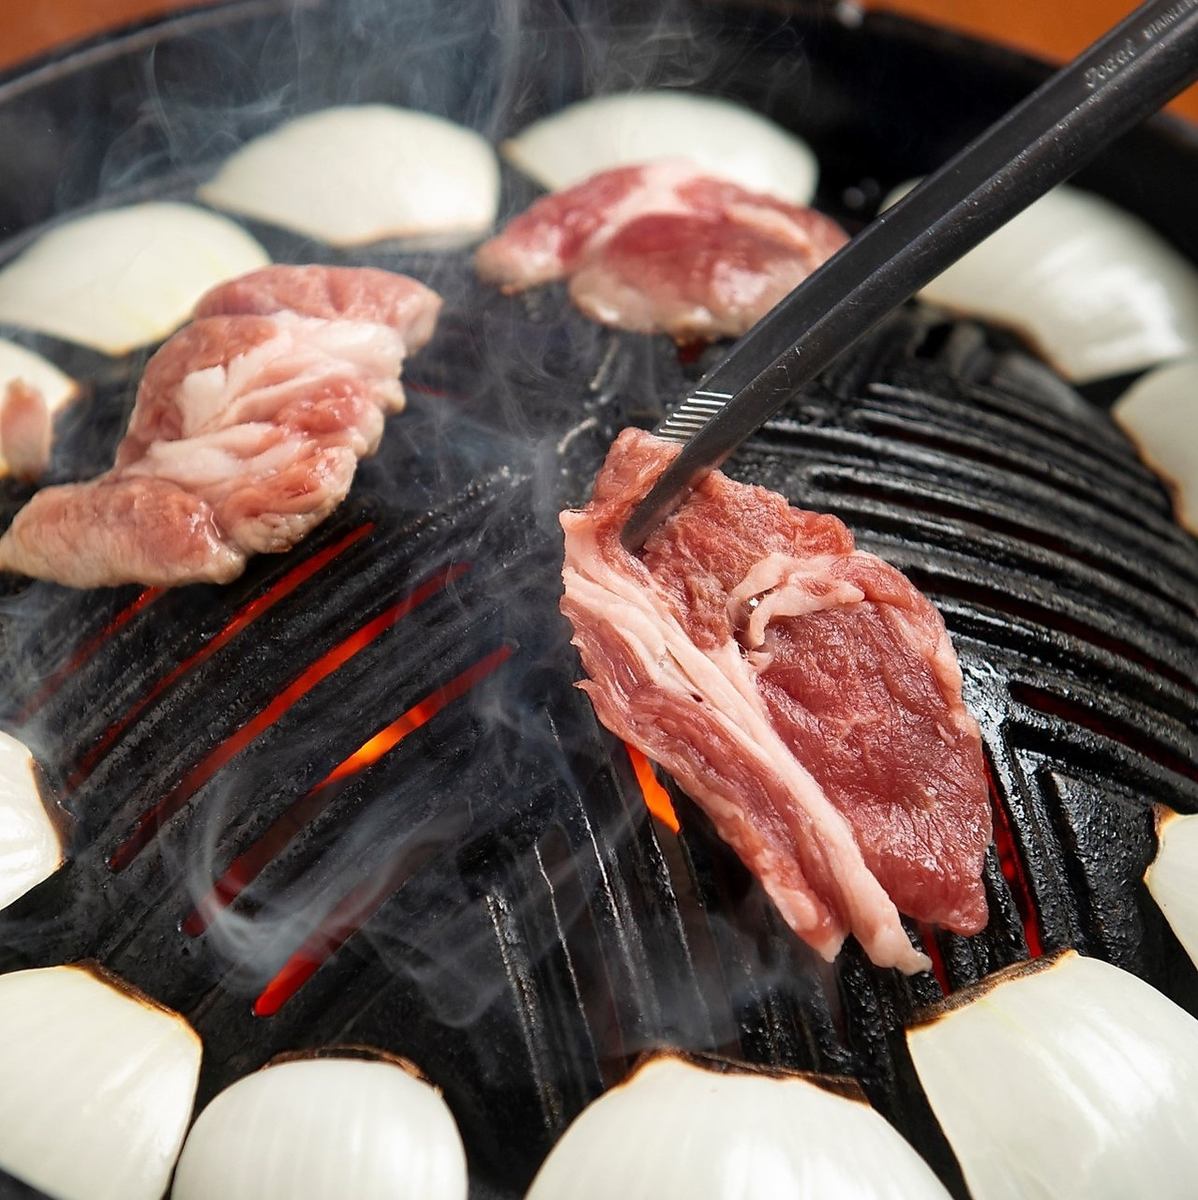 ≪2 minutes walk from Shinjuku Sanchome Station≫ Raw lamb specialty store! Charcoal fire seven wheels "Genghis Khan"